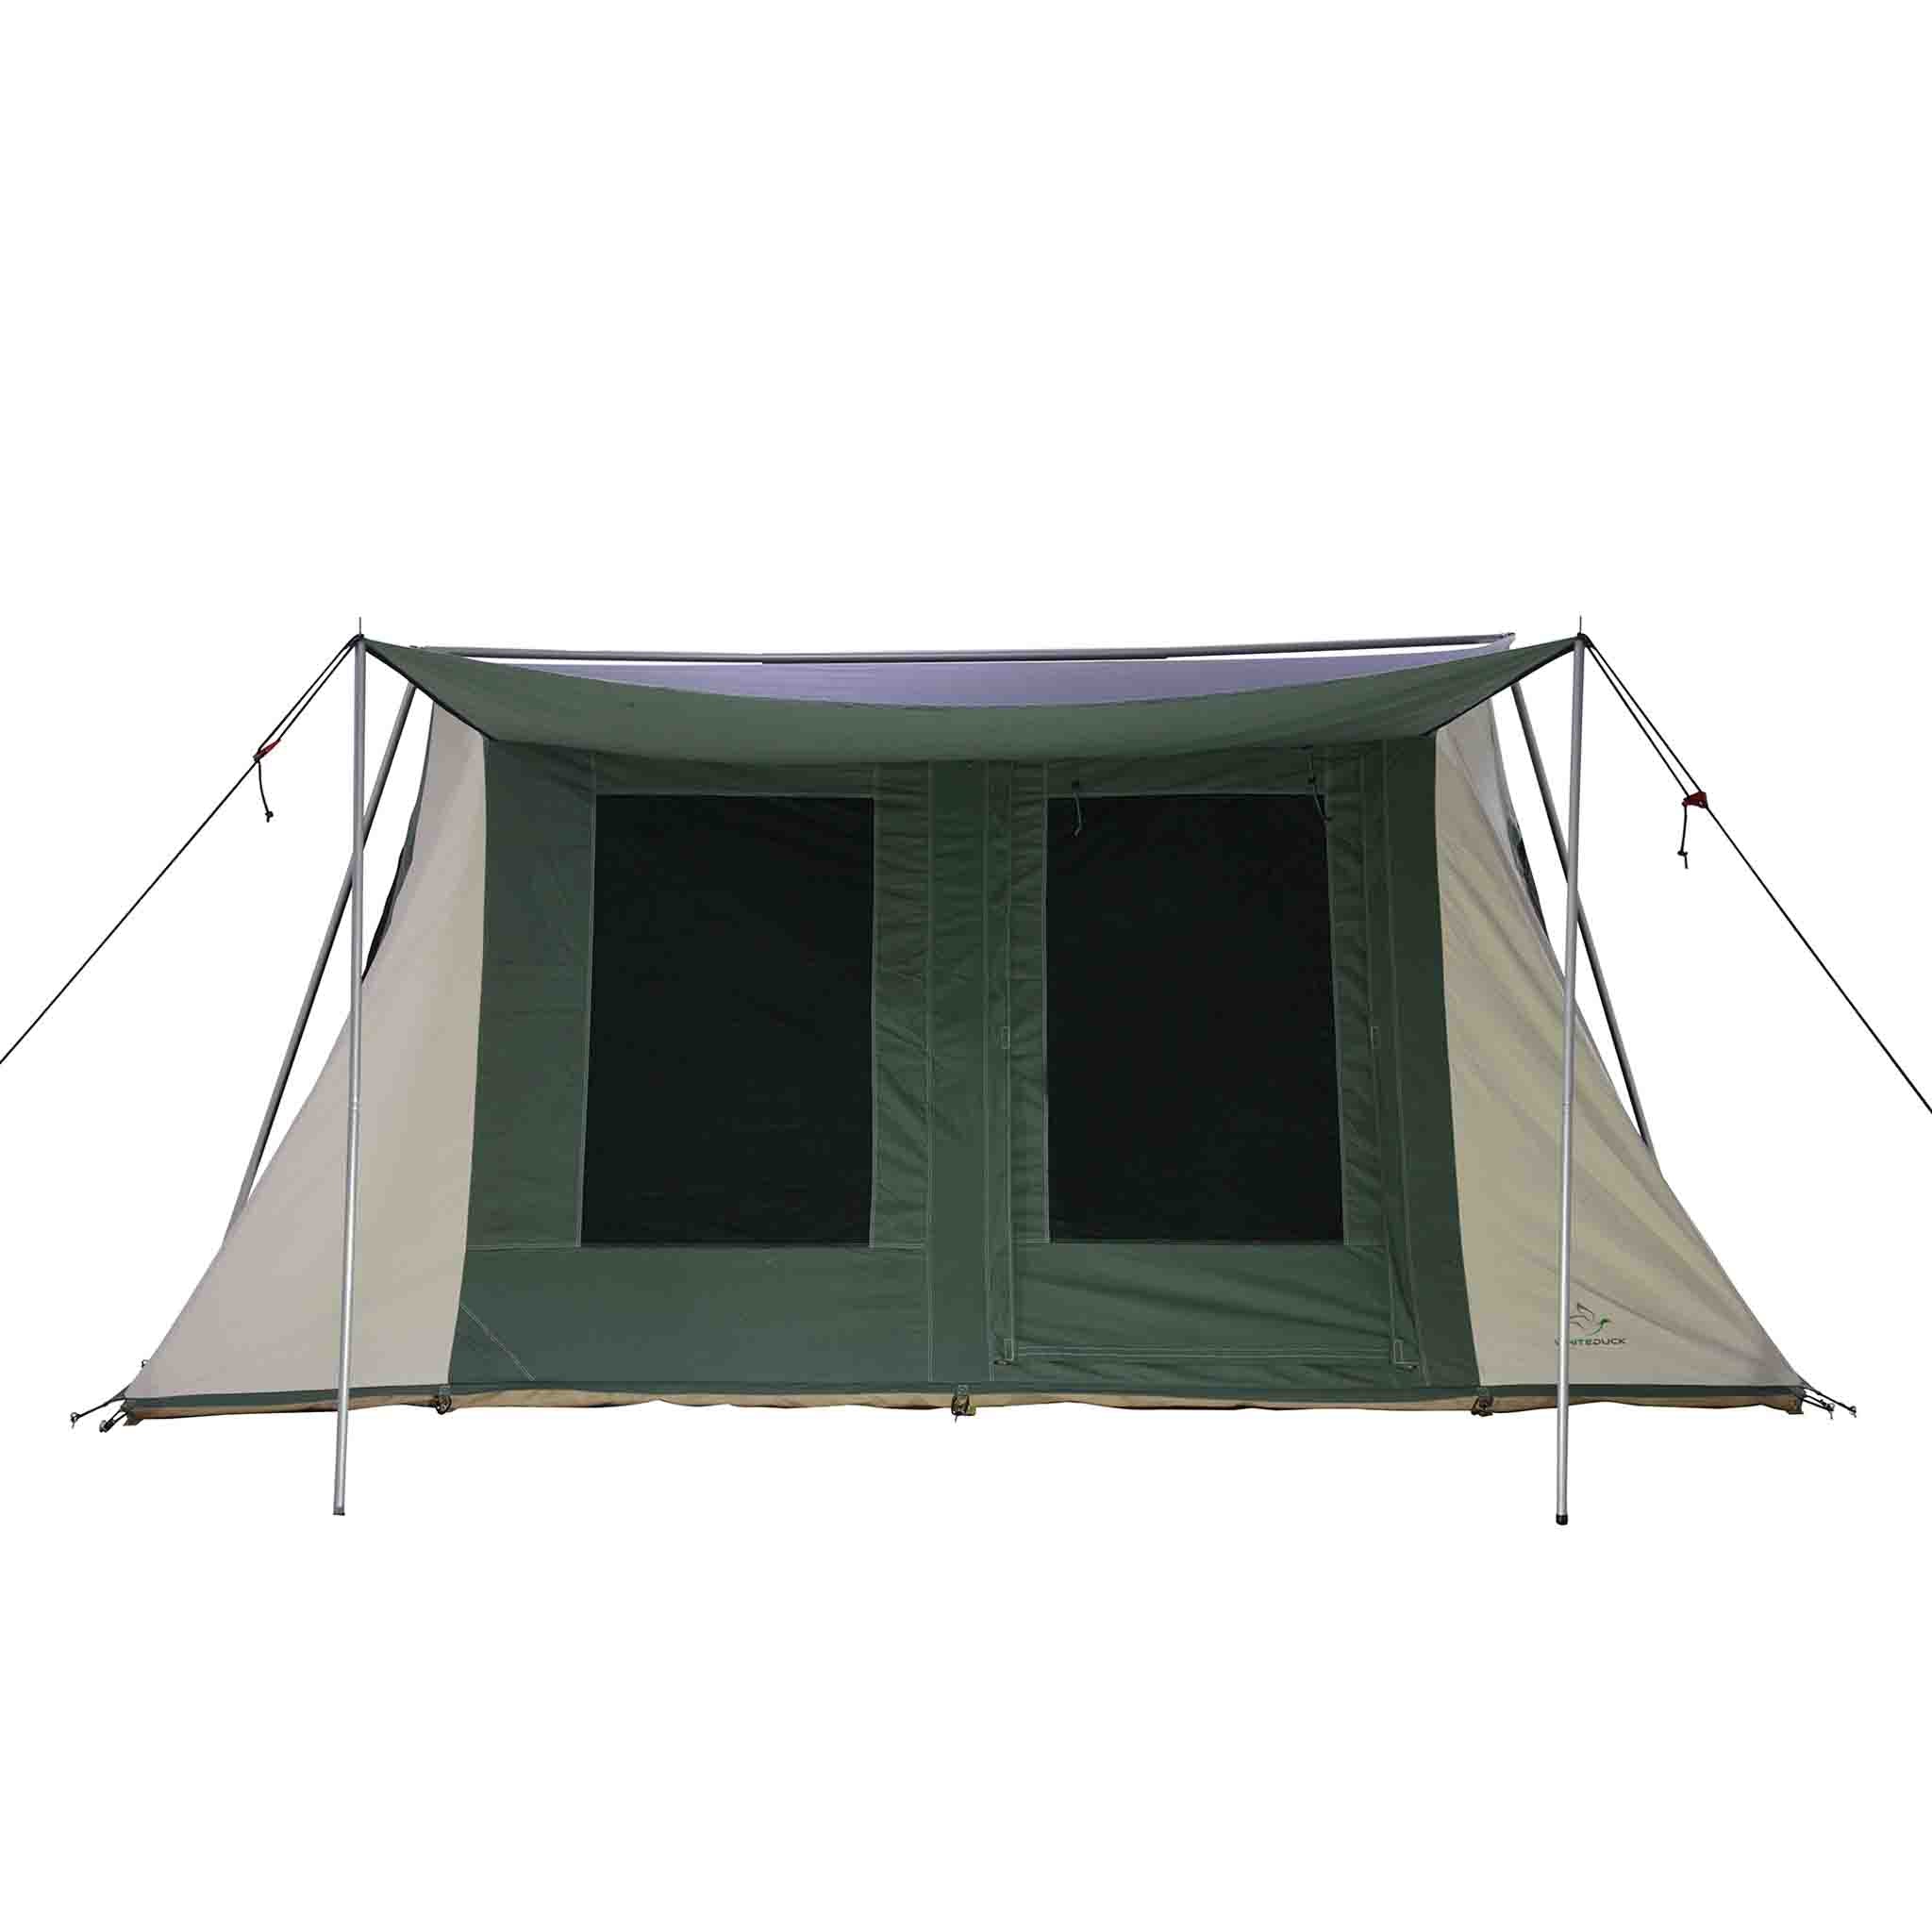 front view of prota canvas tent 10x14